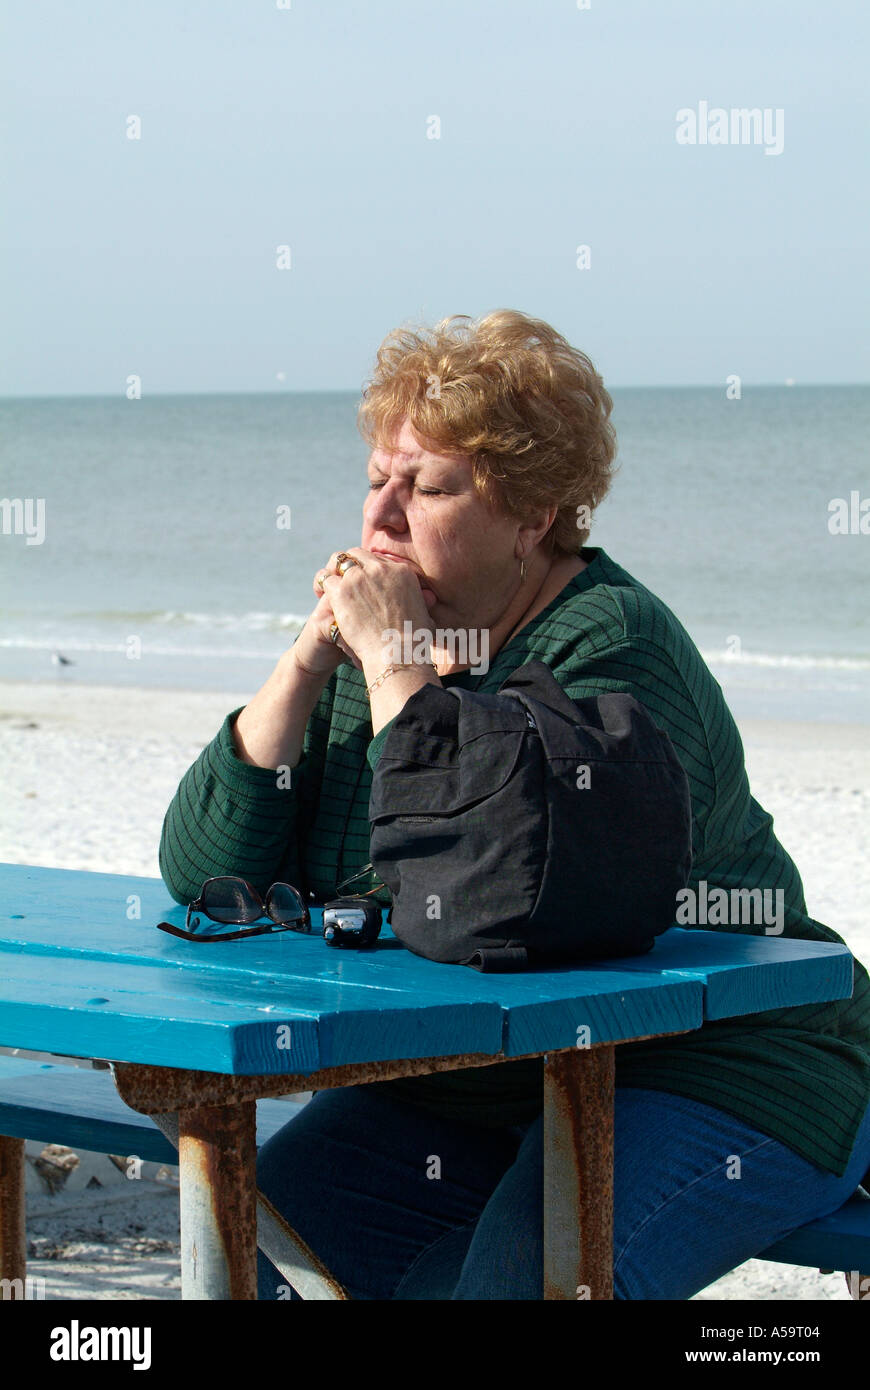 Visitors to St Pete Beach and Pasa Grille Florida engage in exercise relaxation and hobbies while vacationing Stock Photo